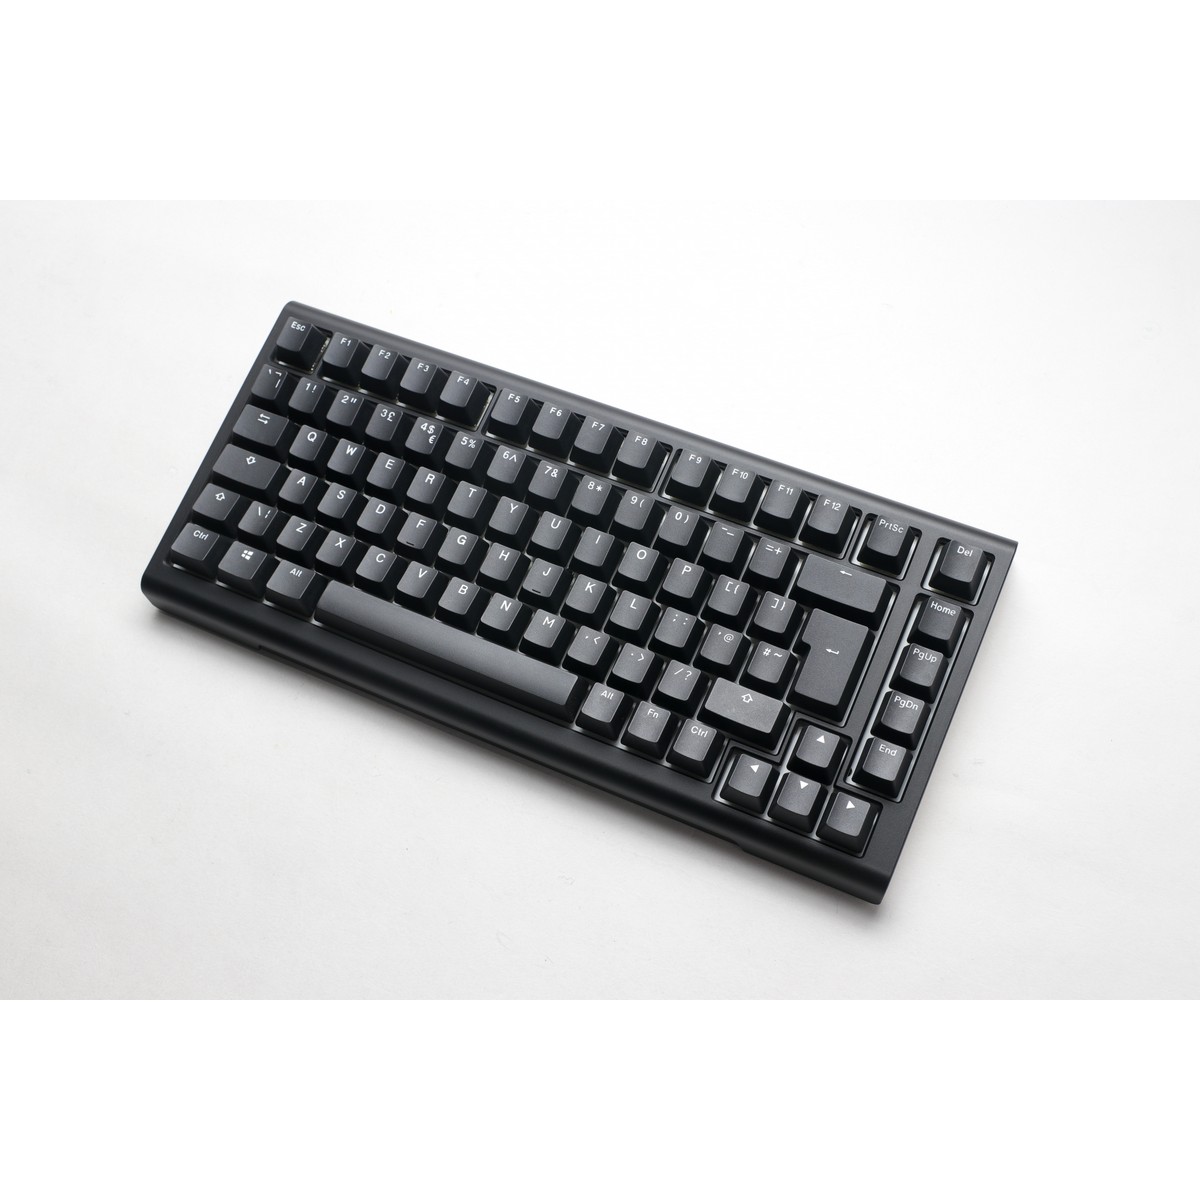 Ducky - Ducky Project D Tinker 75% RGB USB Mechanical Gaming Keyboard Cherry MX Brown -